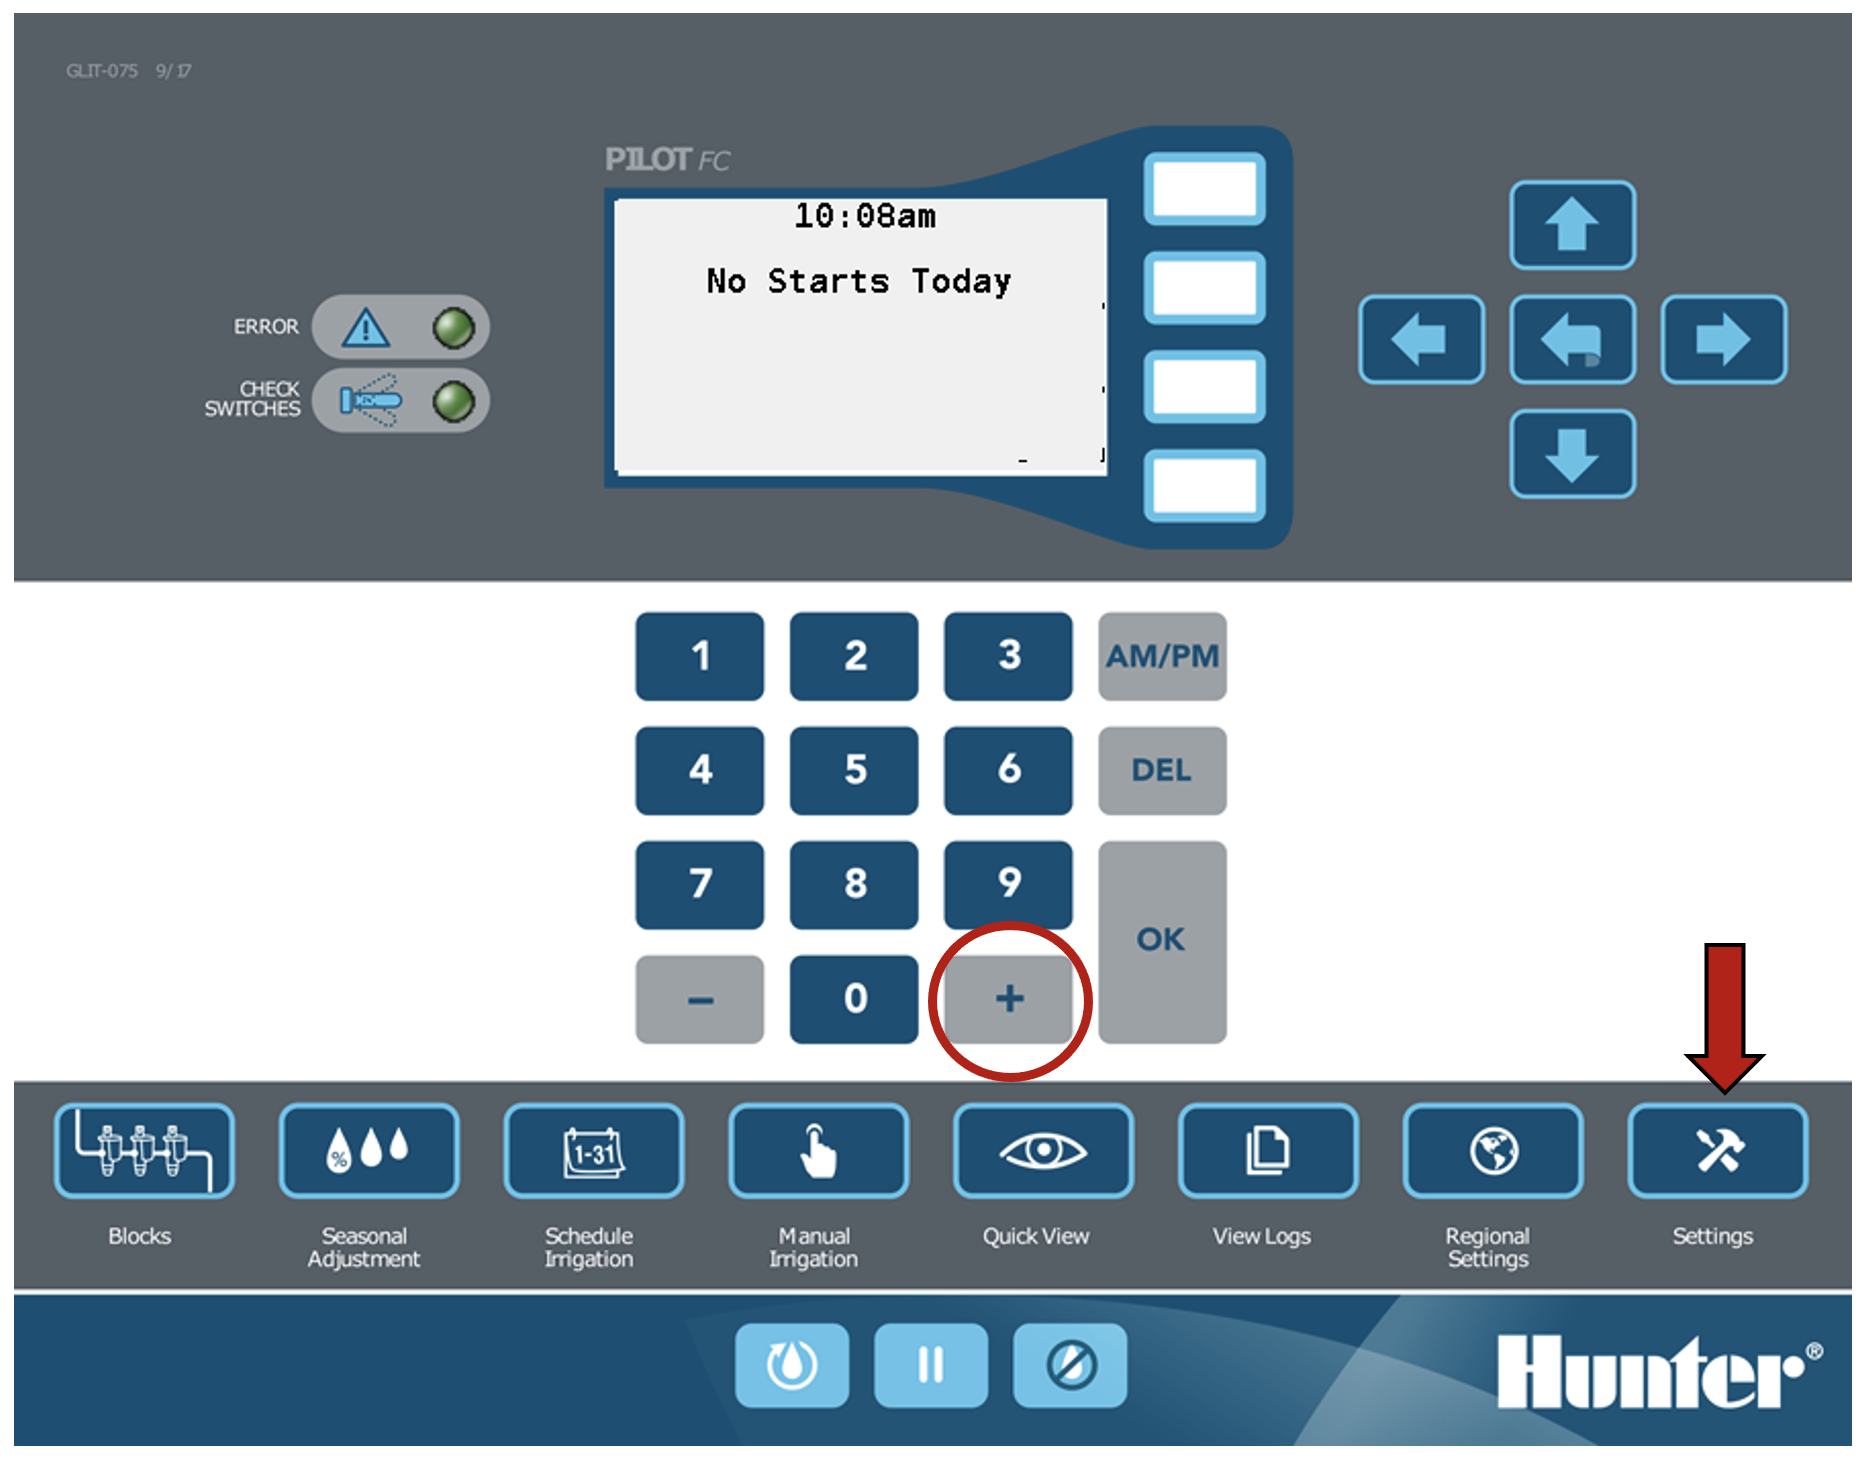 Image of the facepack highlighting the Settings button and the plus button.